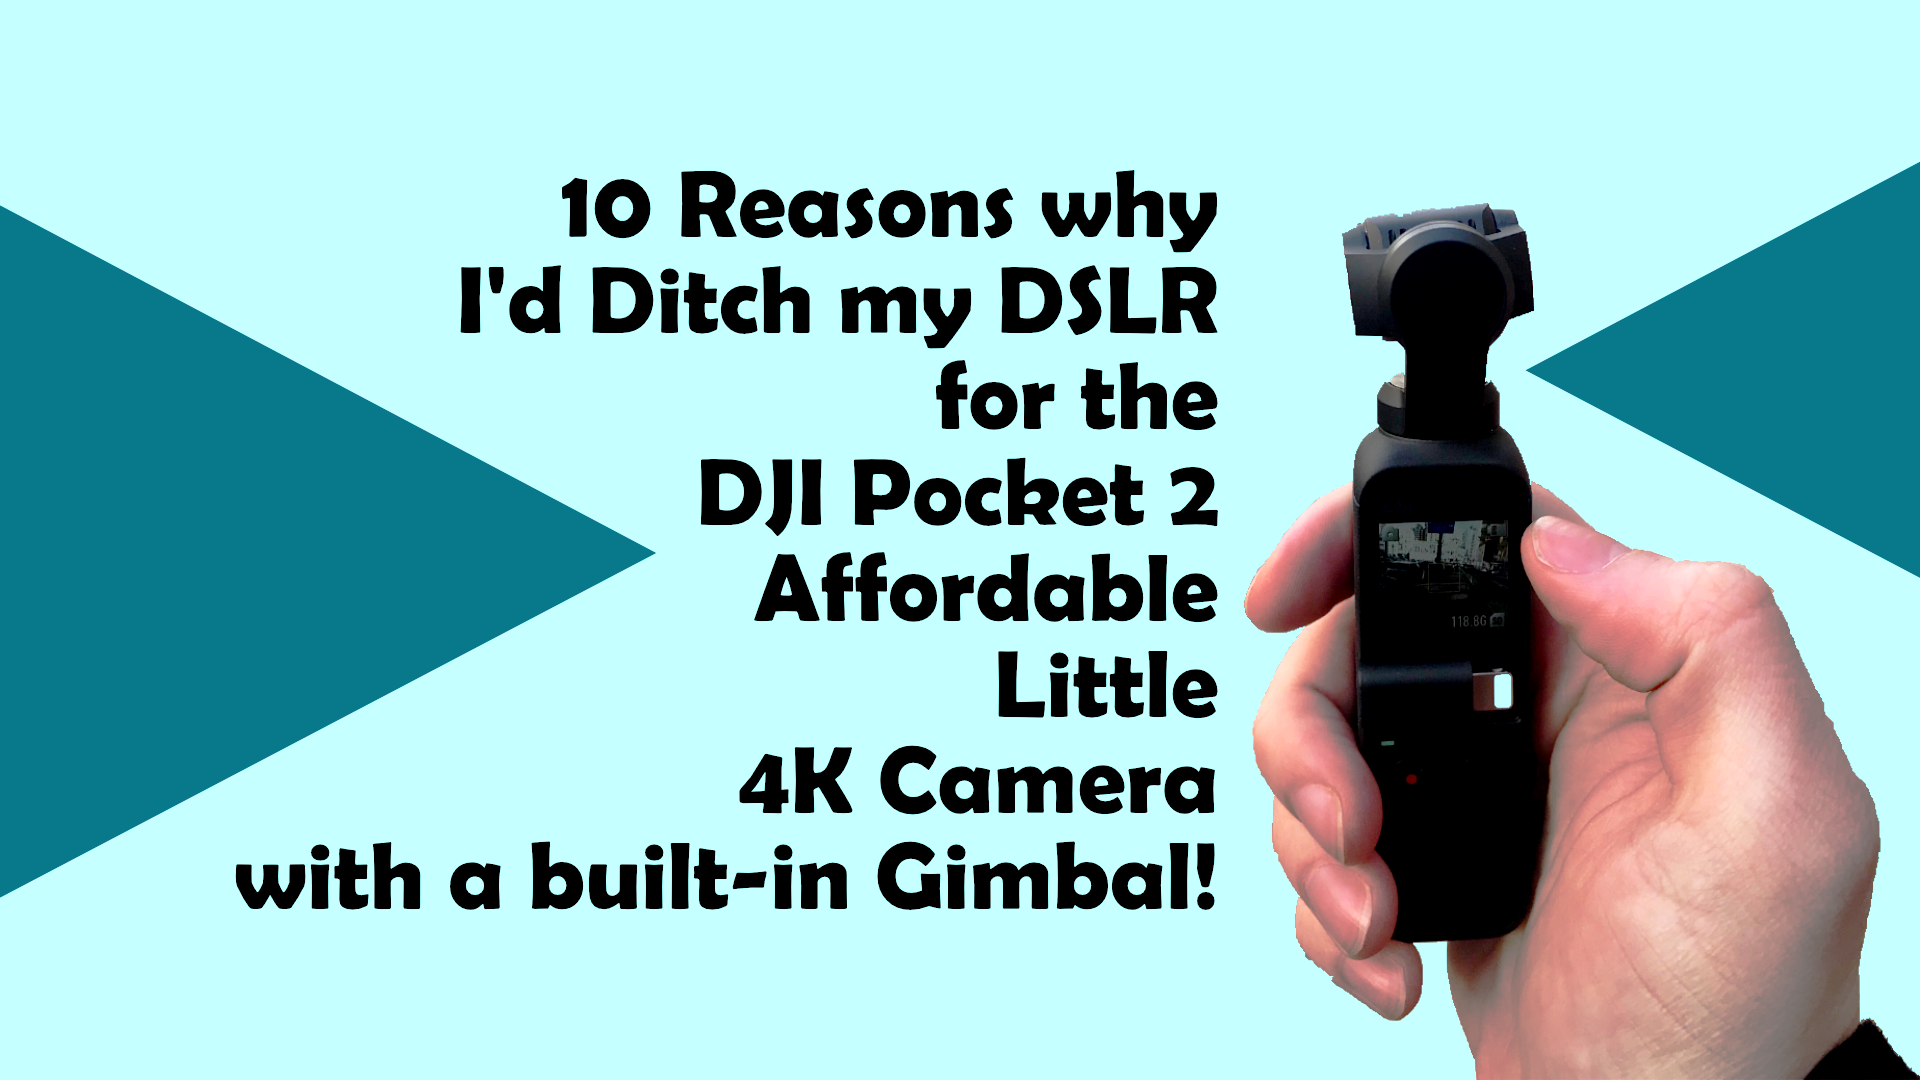 Affordable Camera with built-in Gimbal = DJI Pocket!